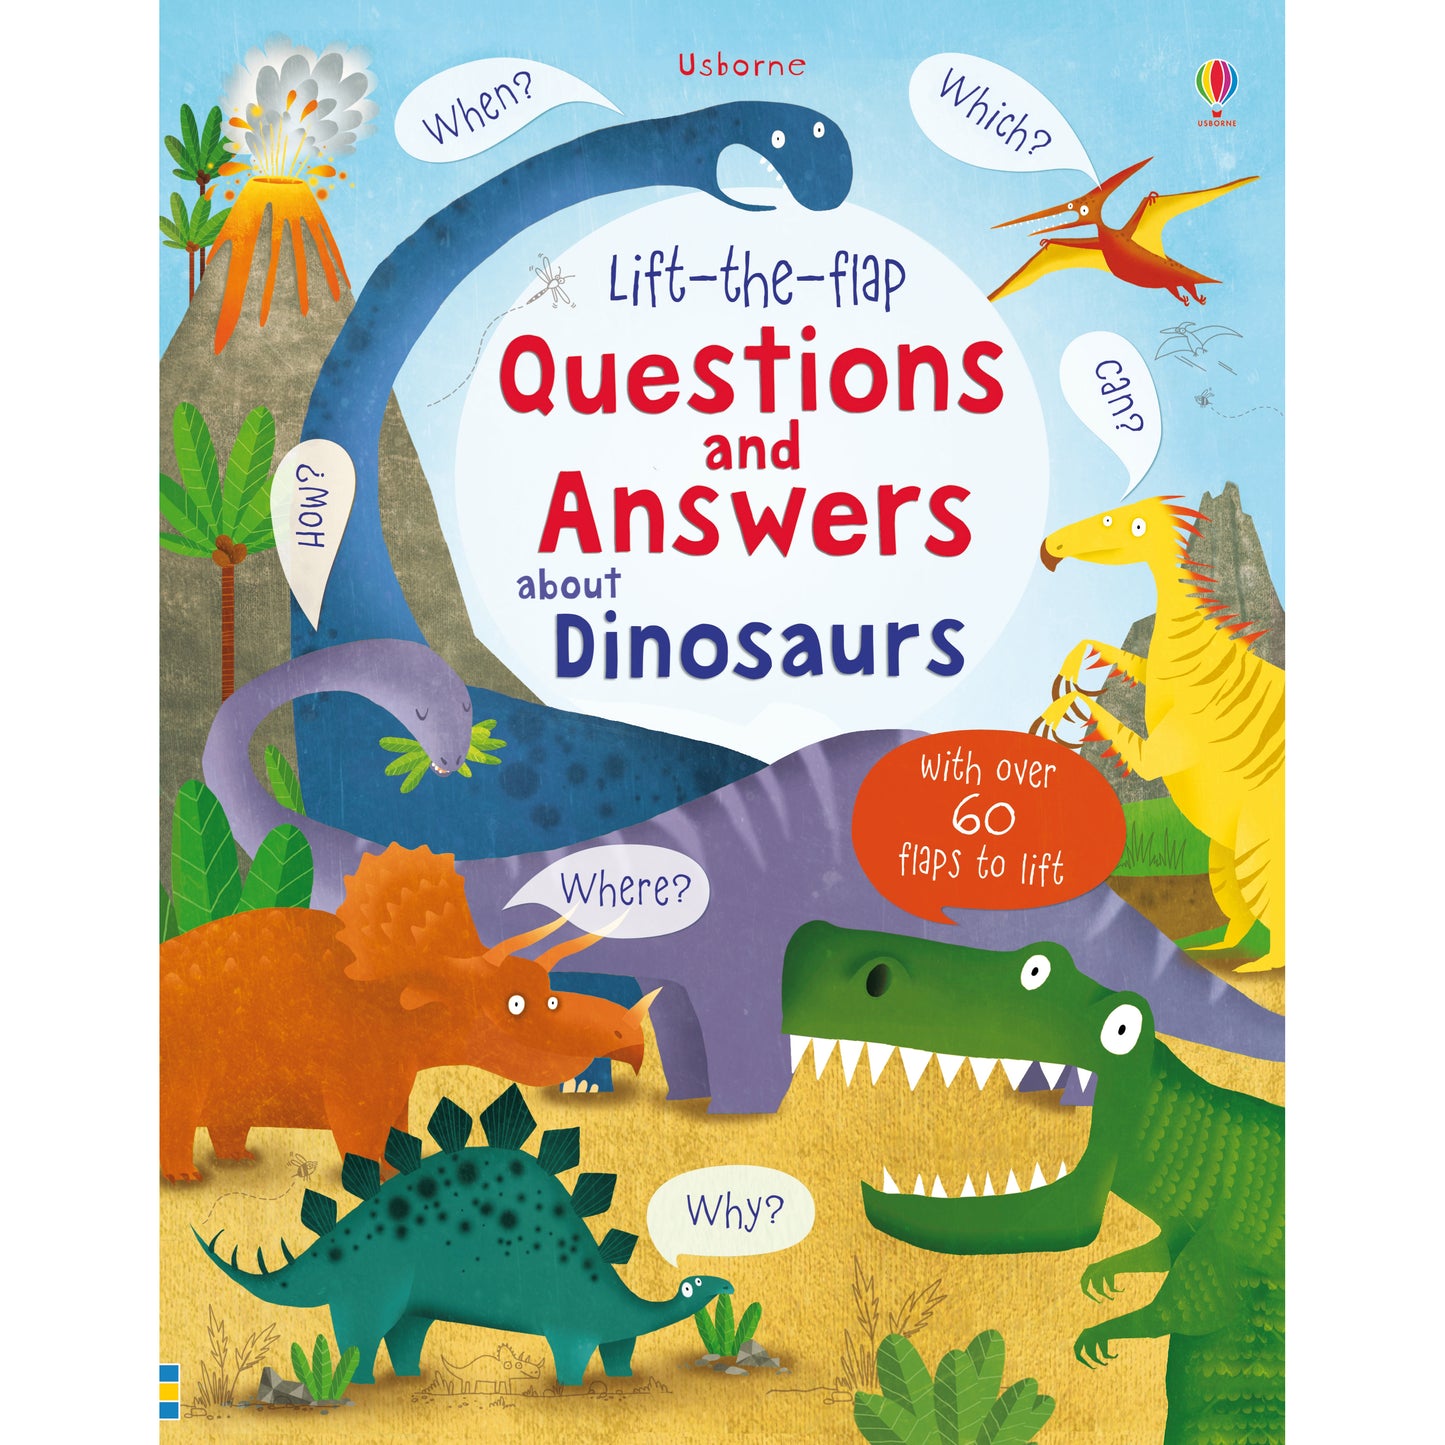 Lift-the-flap: Questions and Answers about Dinosaurs